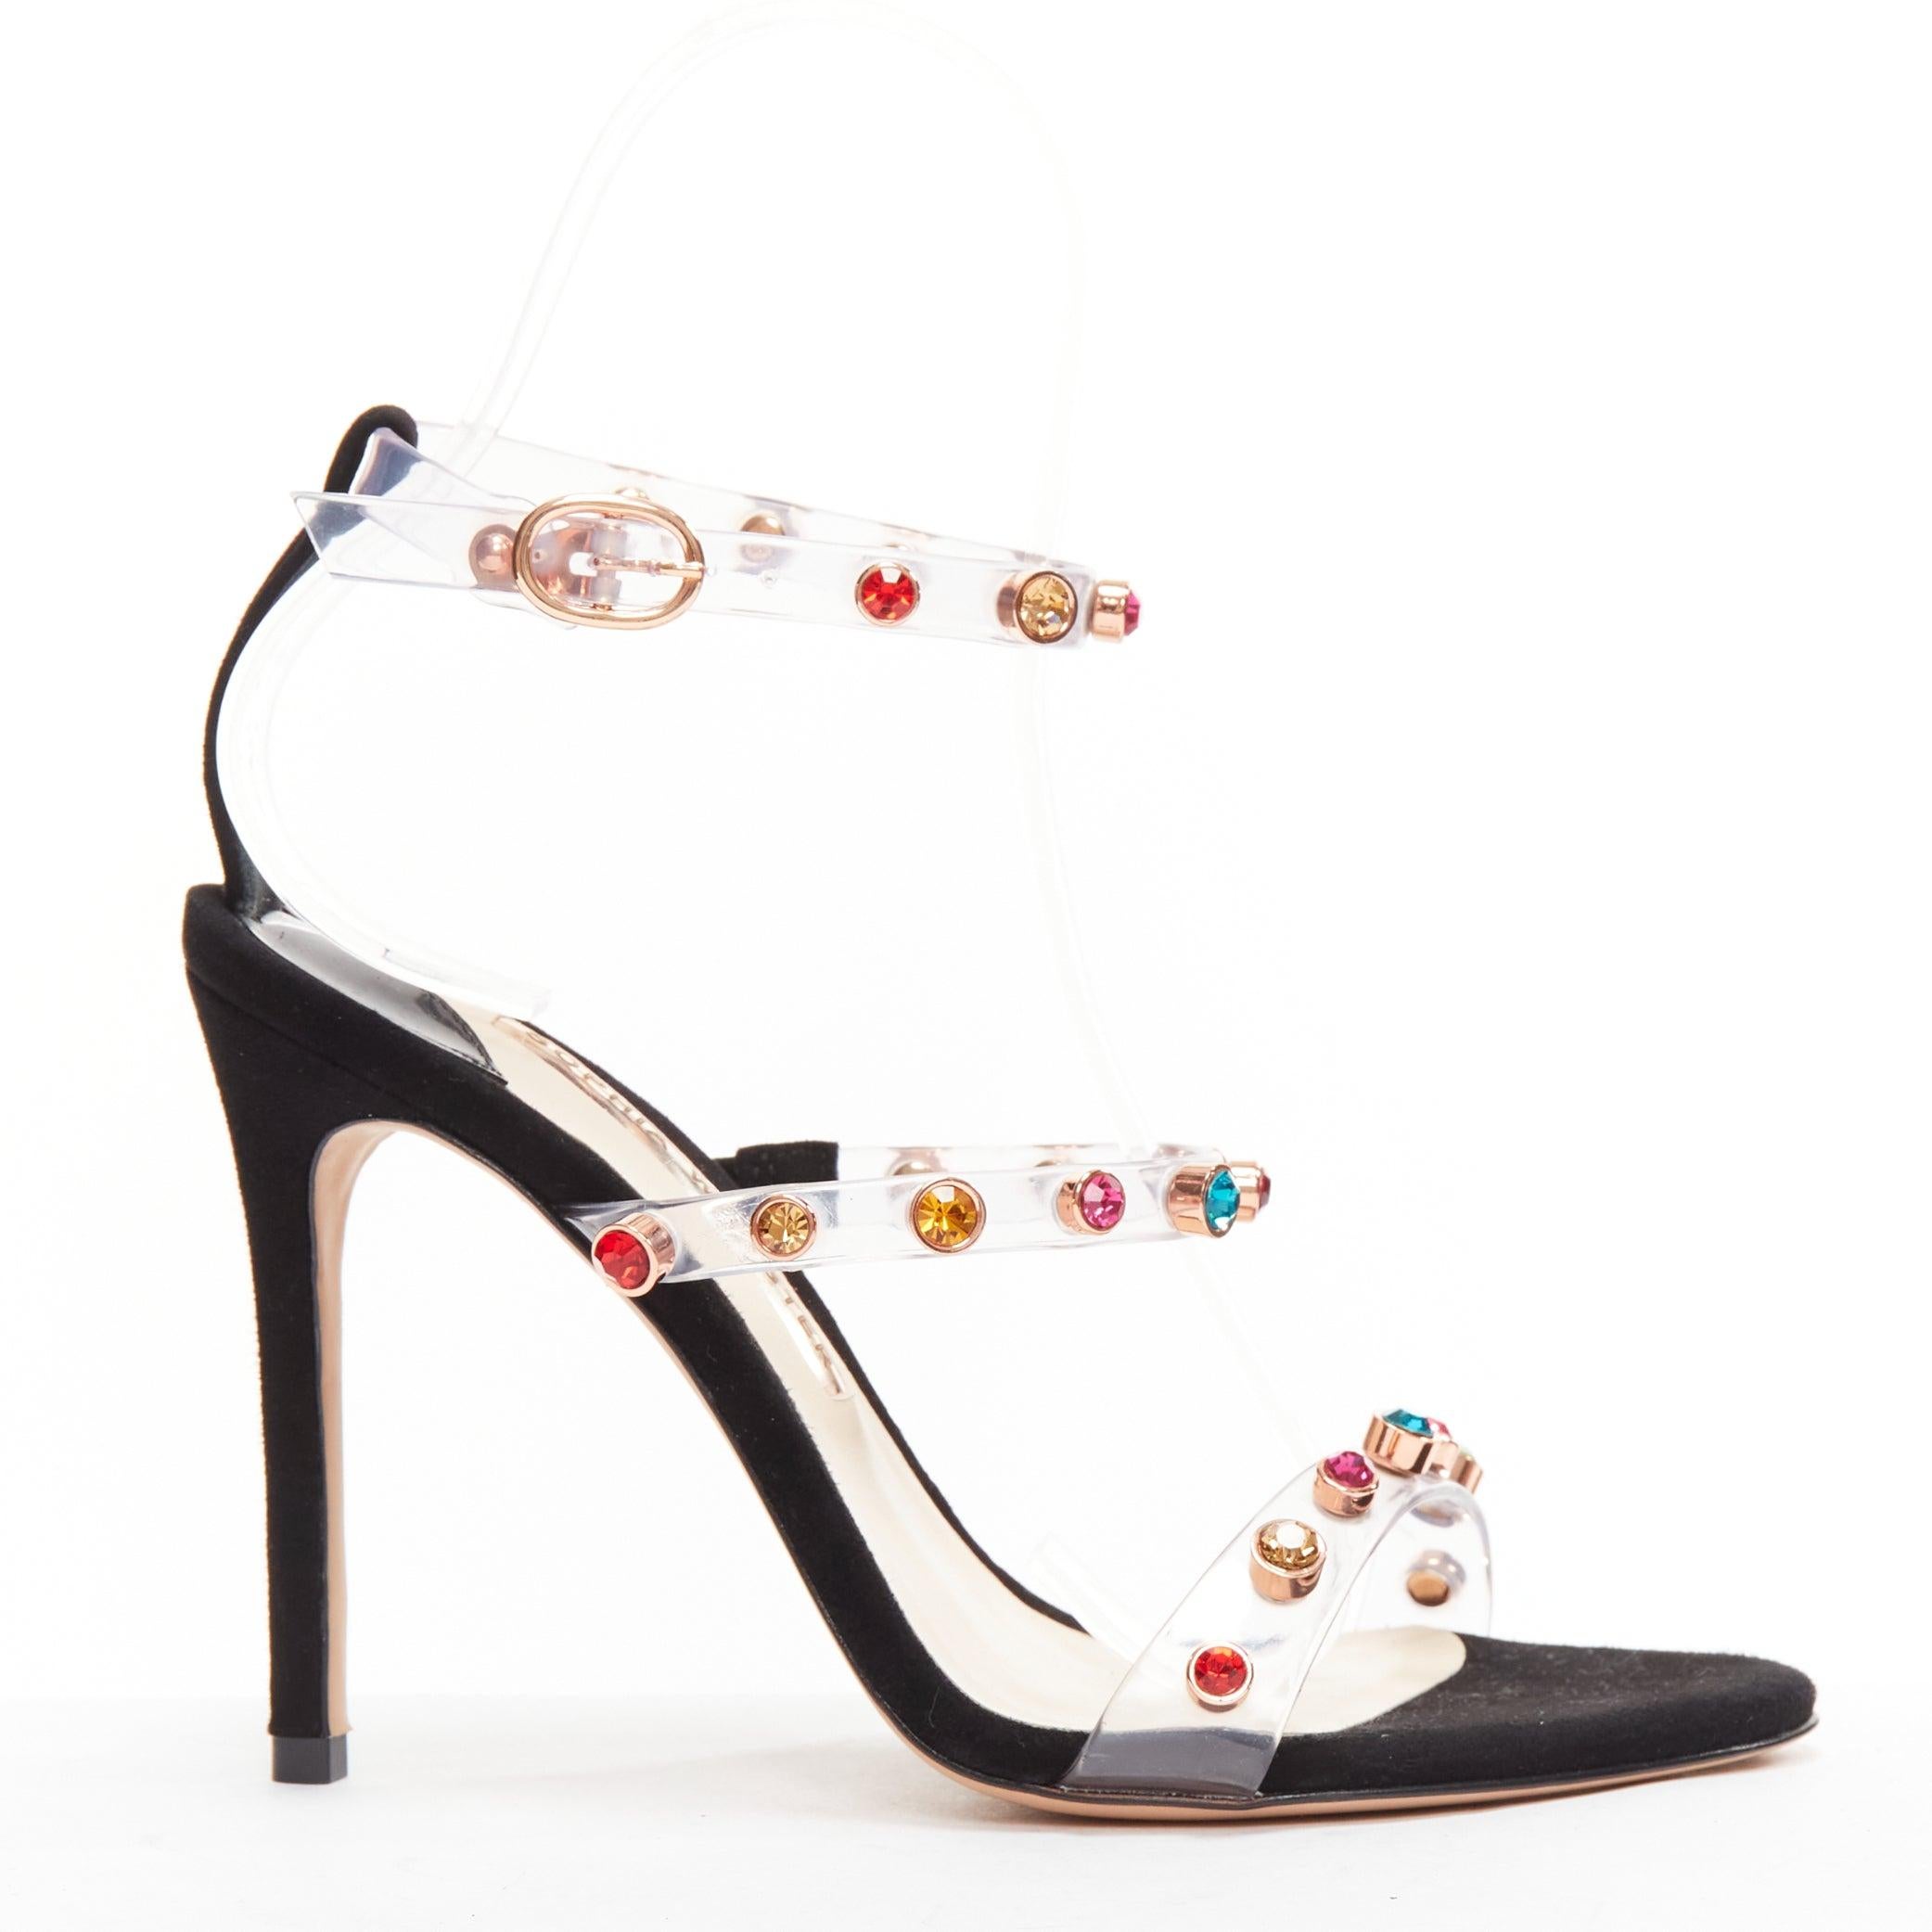 SOPHIA WEBSTER Rosalind 100 multicolor gem crystal PVC strappy heels EU38.5
Reference: BSHW/A00155
Brand: Sophia webster
Model: Rosalind 100
Material: PVC, Suede
Color: Black, Multicolour
Pattern: Solid
Closure: Ankle Strap
Lining: Nude